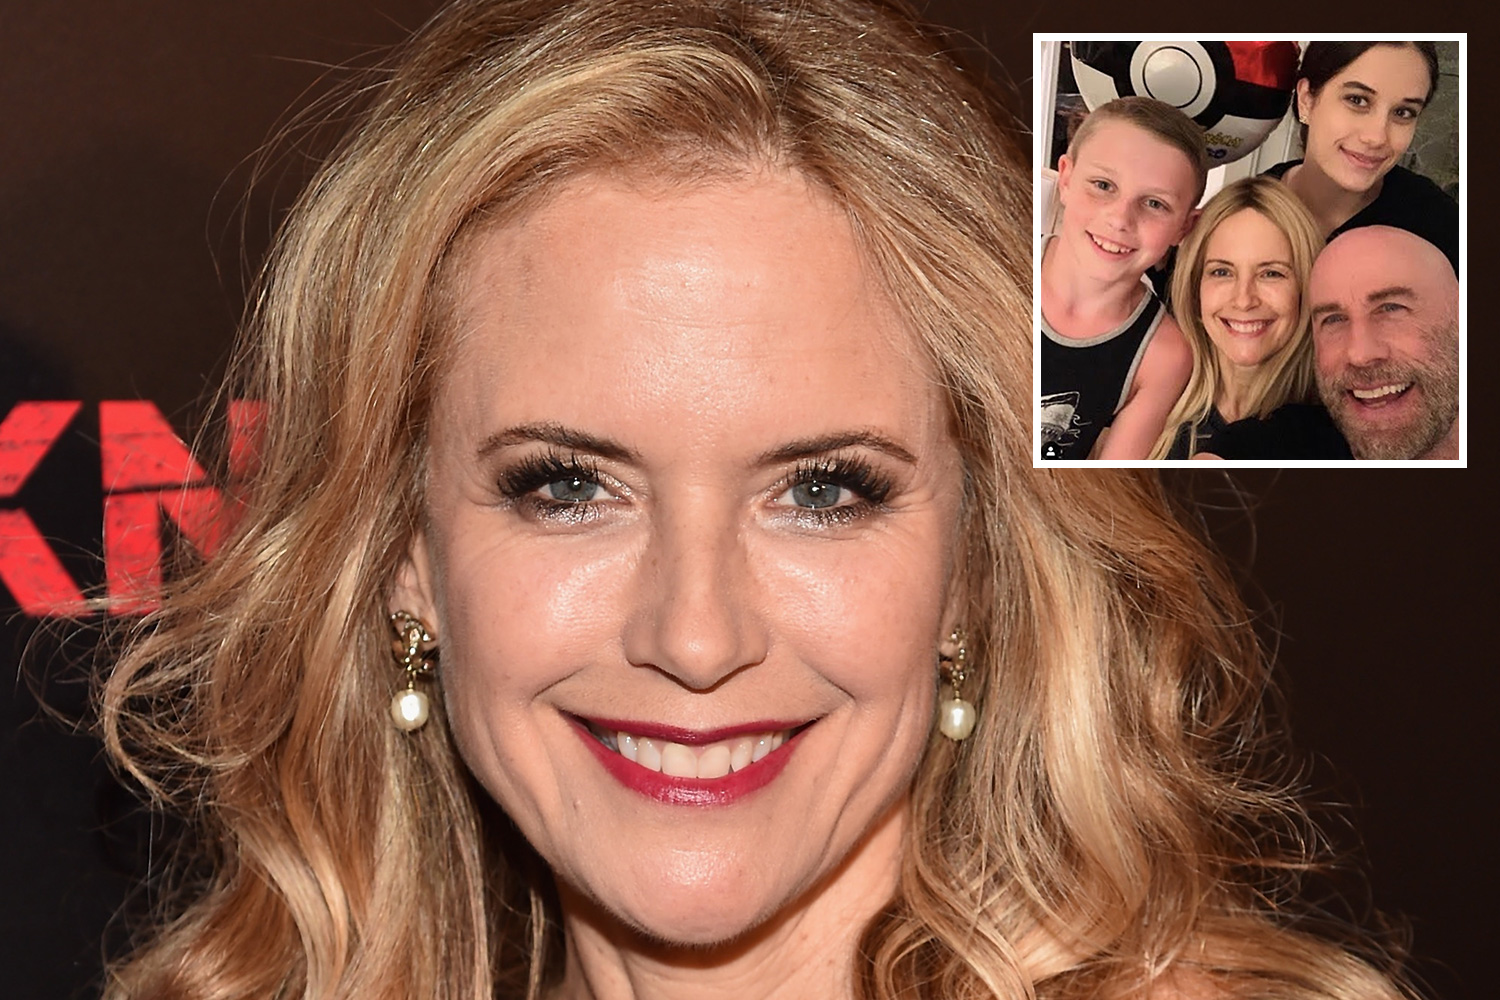 What type of cancer did Kelly Preston, John Travolta’s wife, have